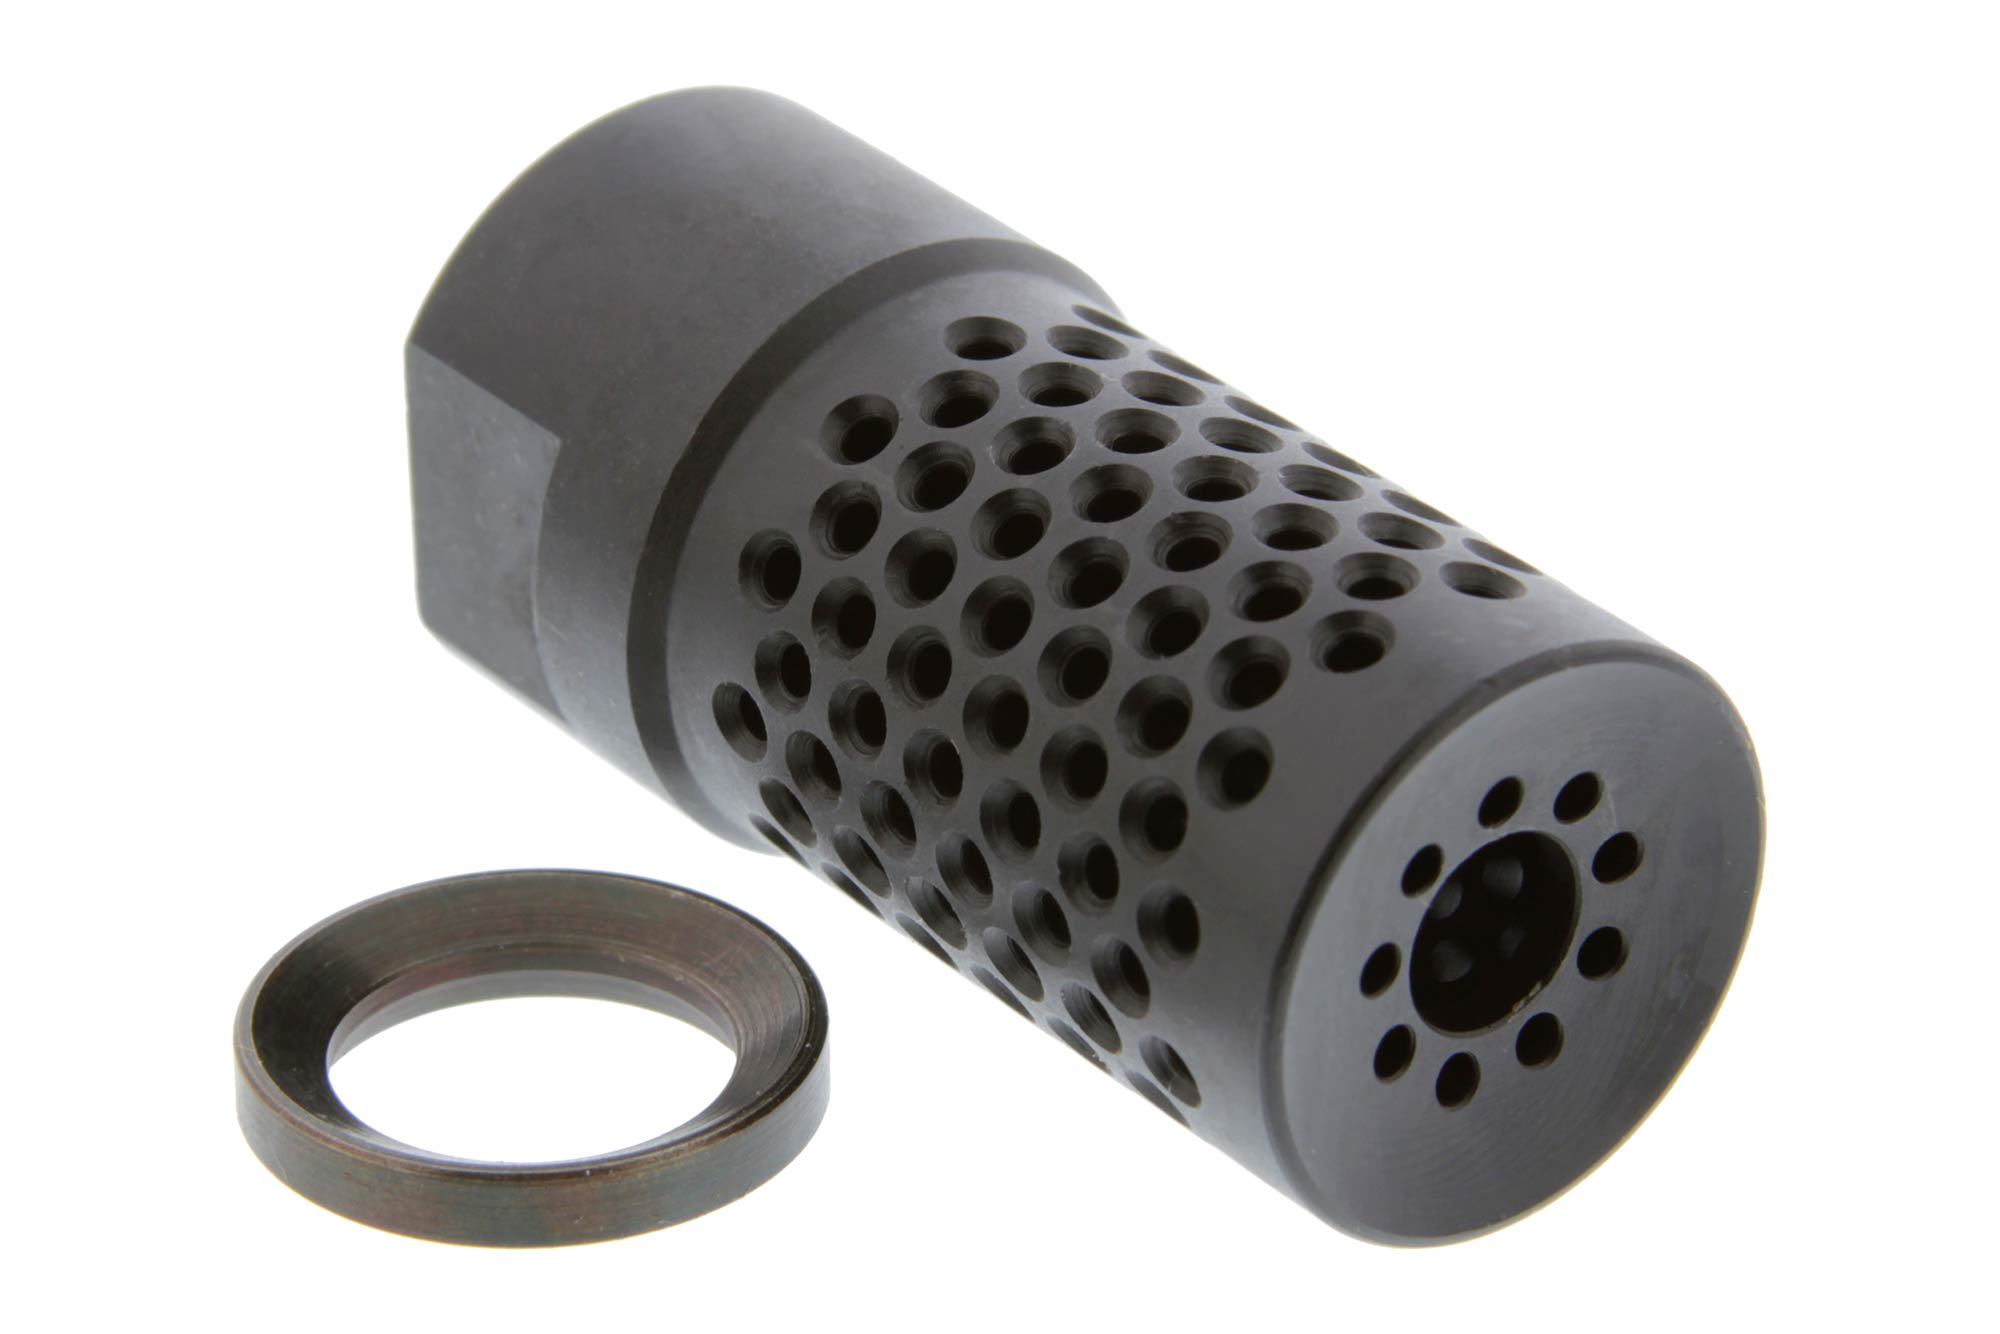 Spike's Tactical Dynacomp Shorty Extreme Compensator - 1/2x28 - $64.99